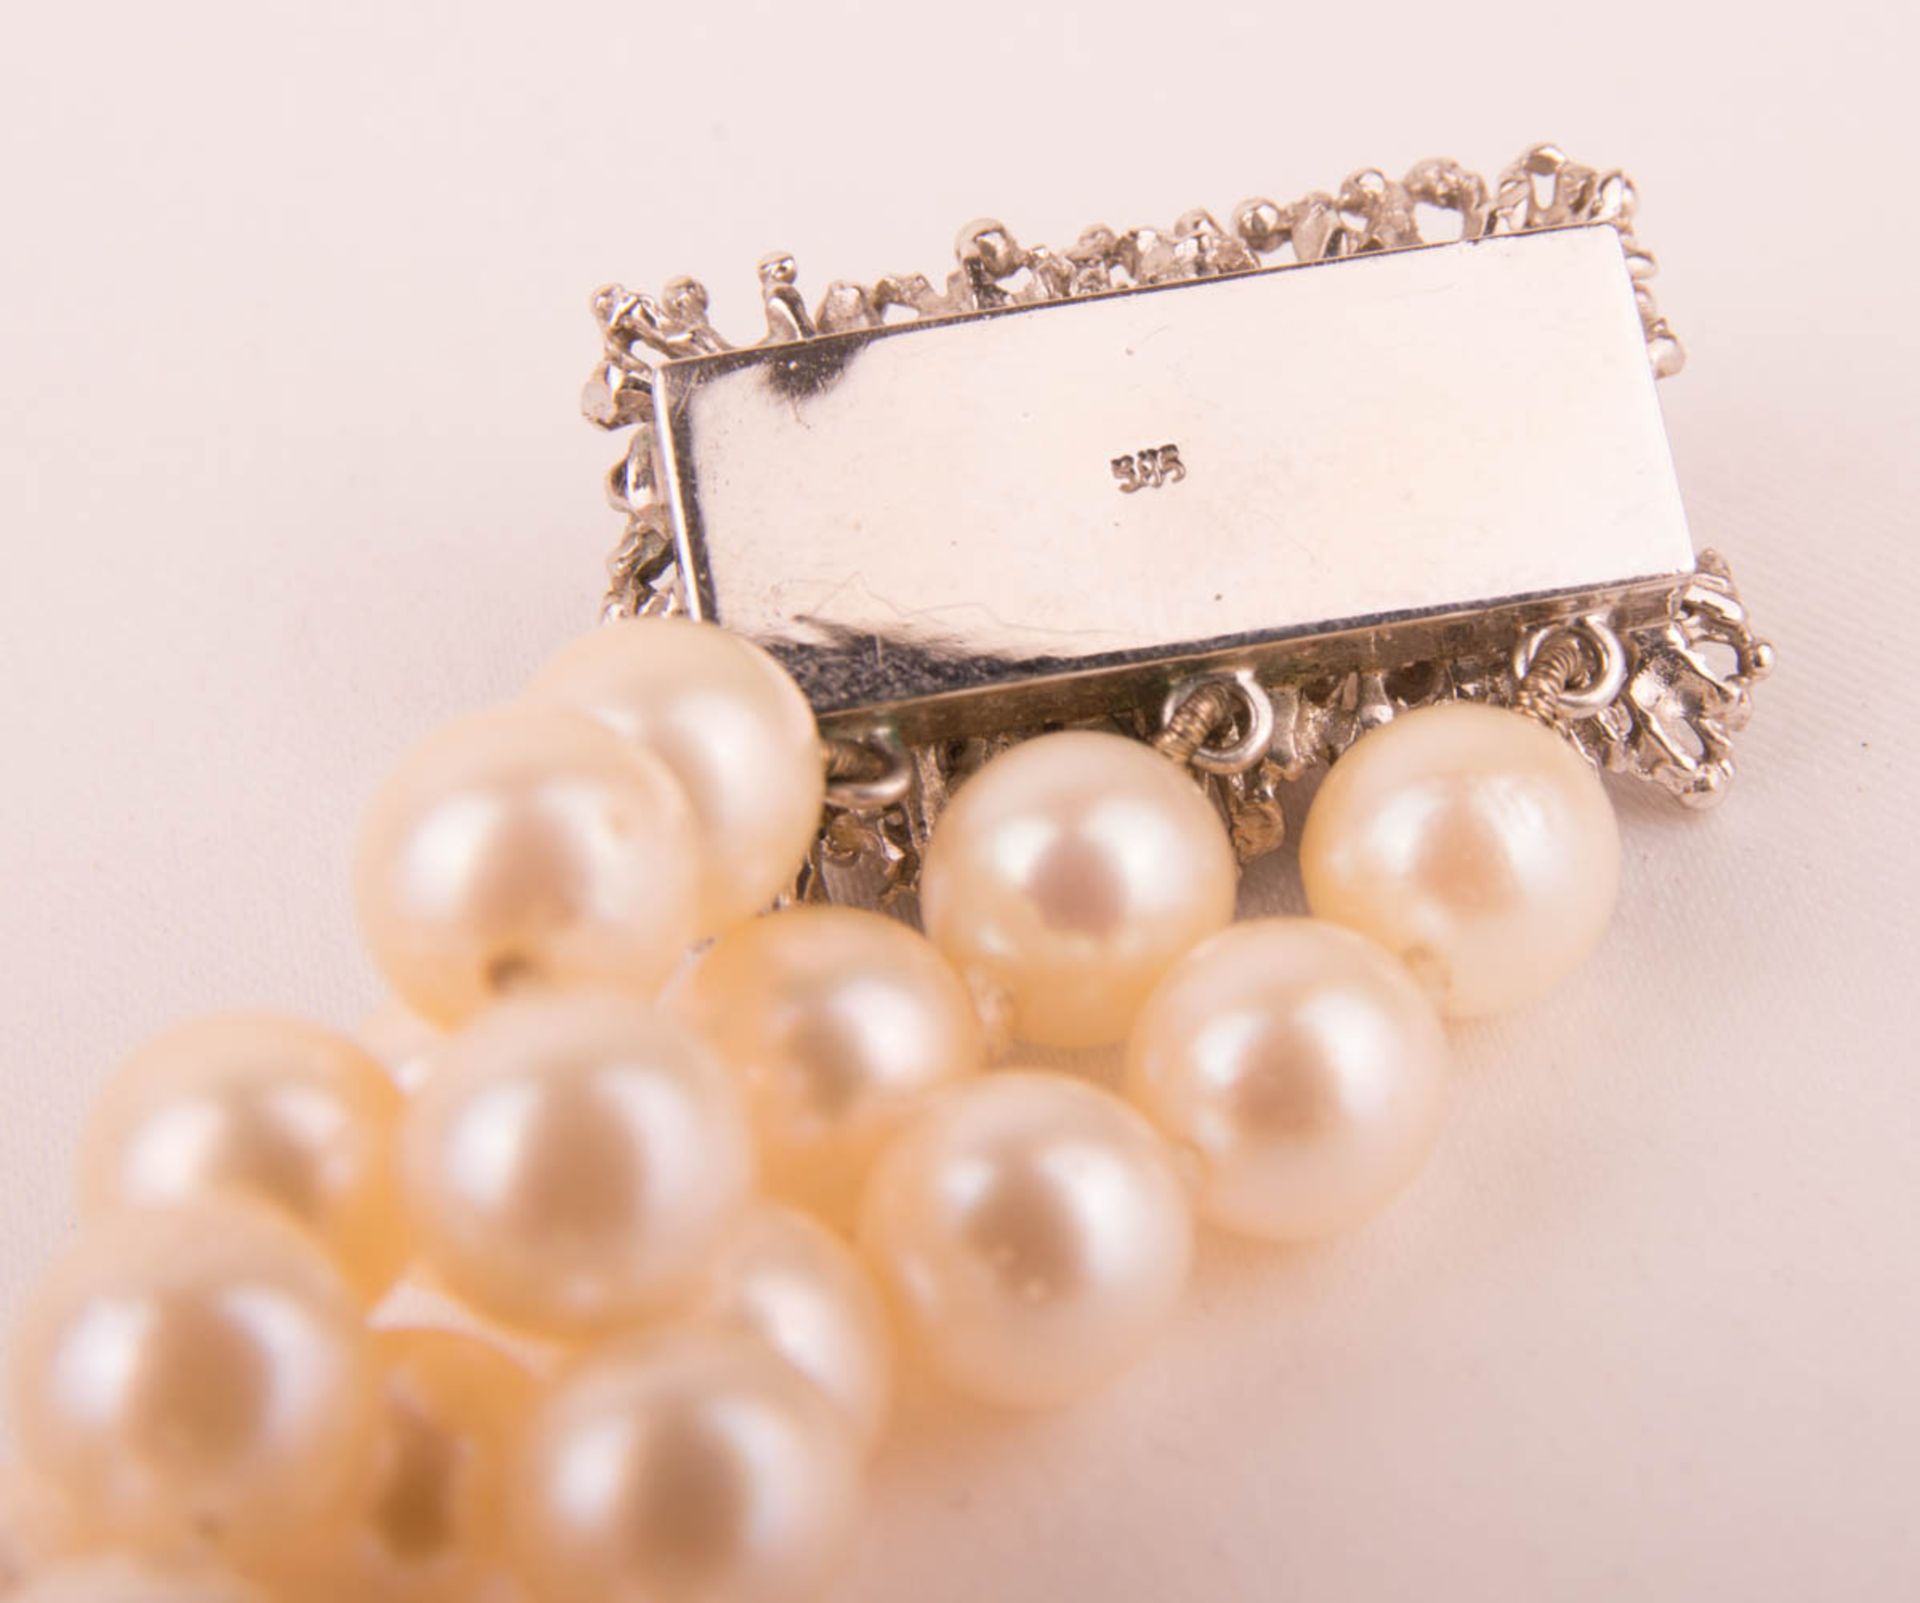 Six pearl necklaces with white gold clasps, 585 white gold. - Image 6 of 8